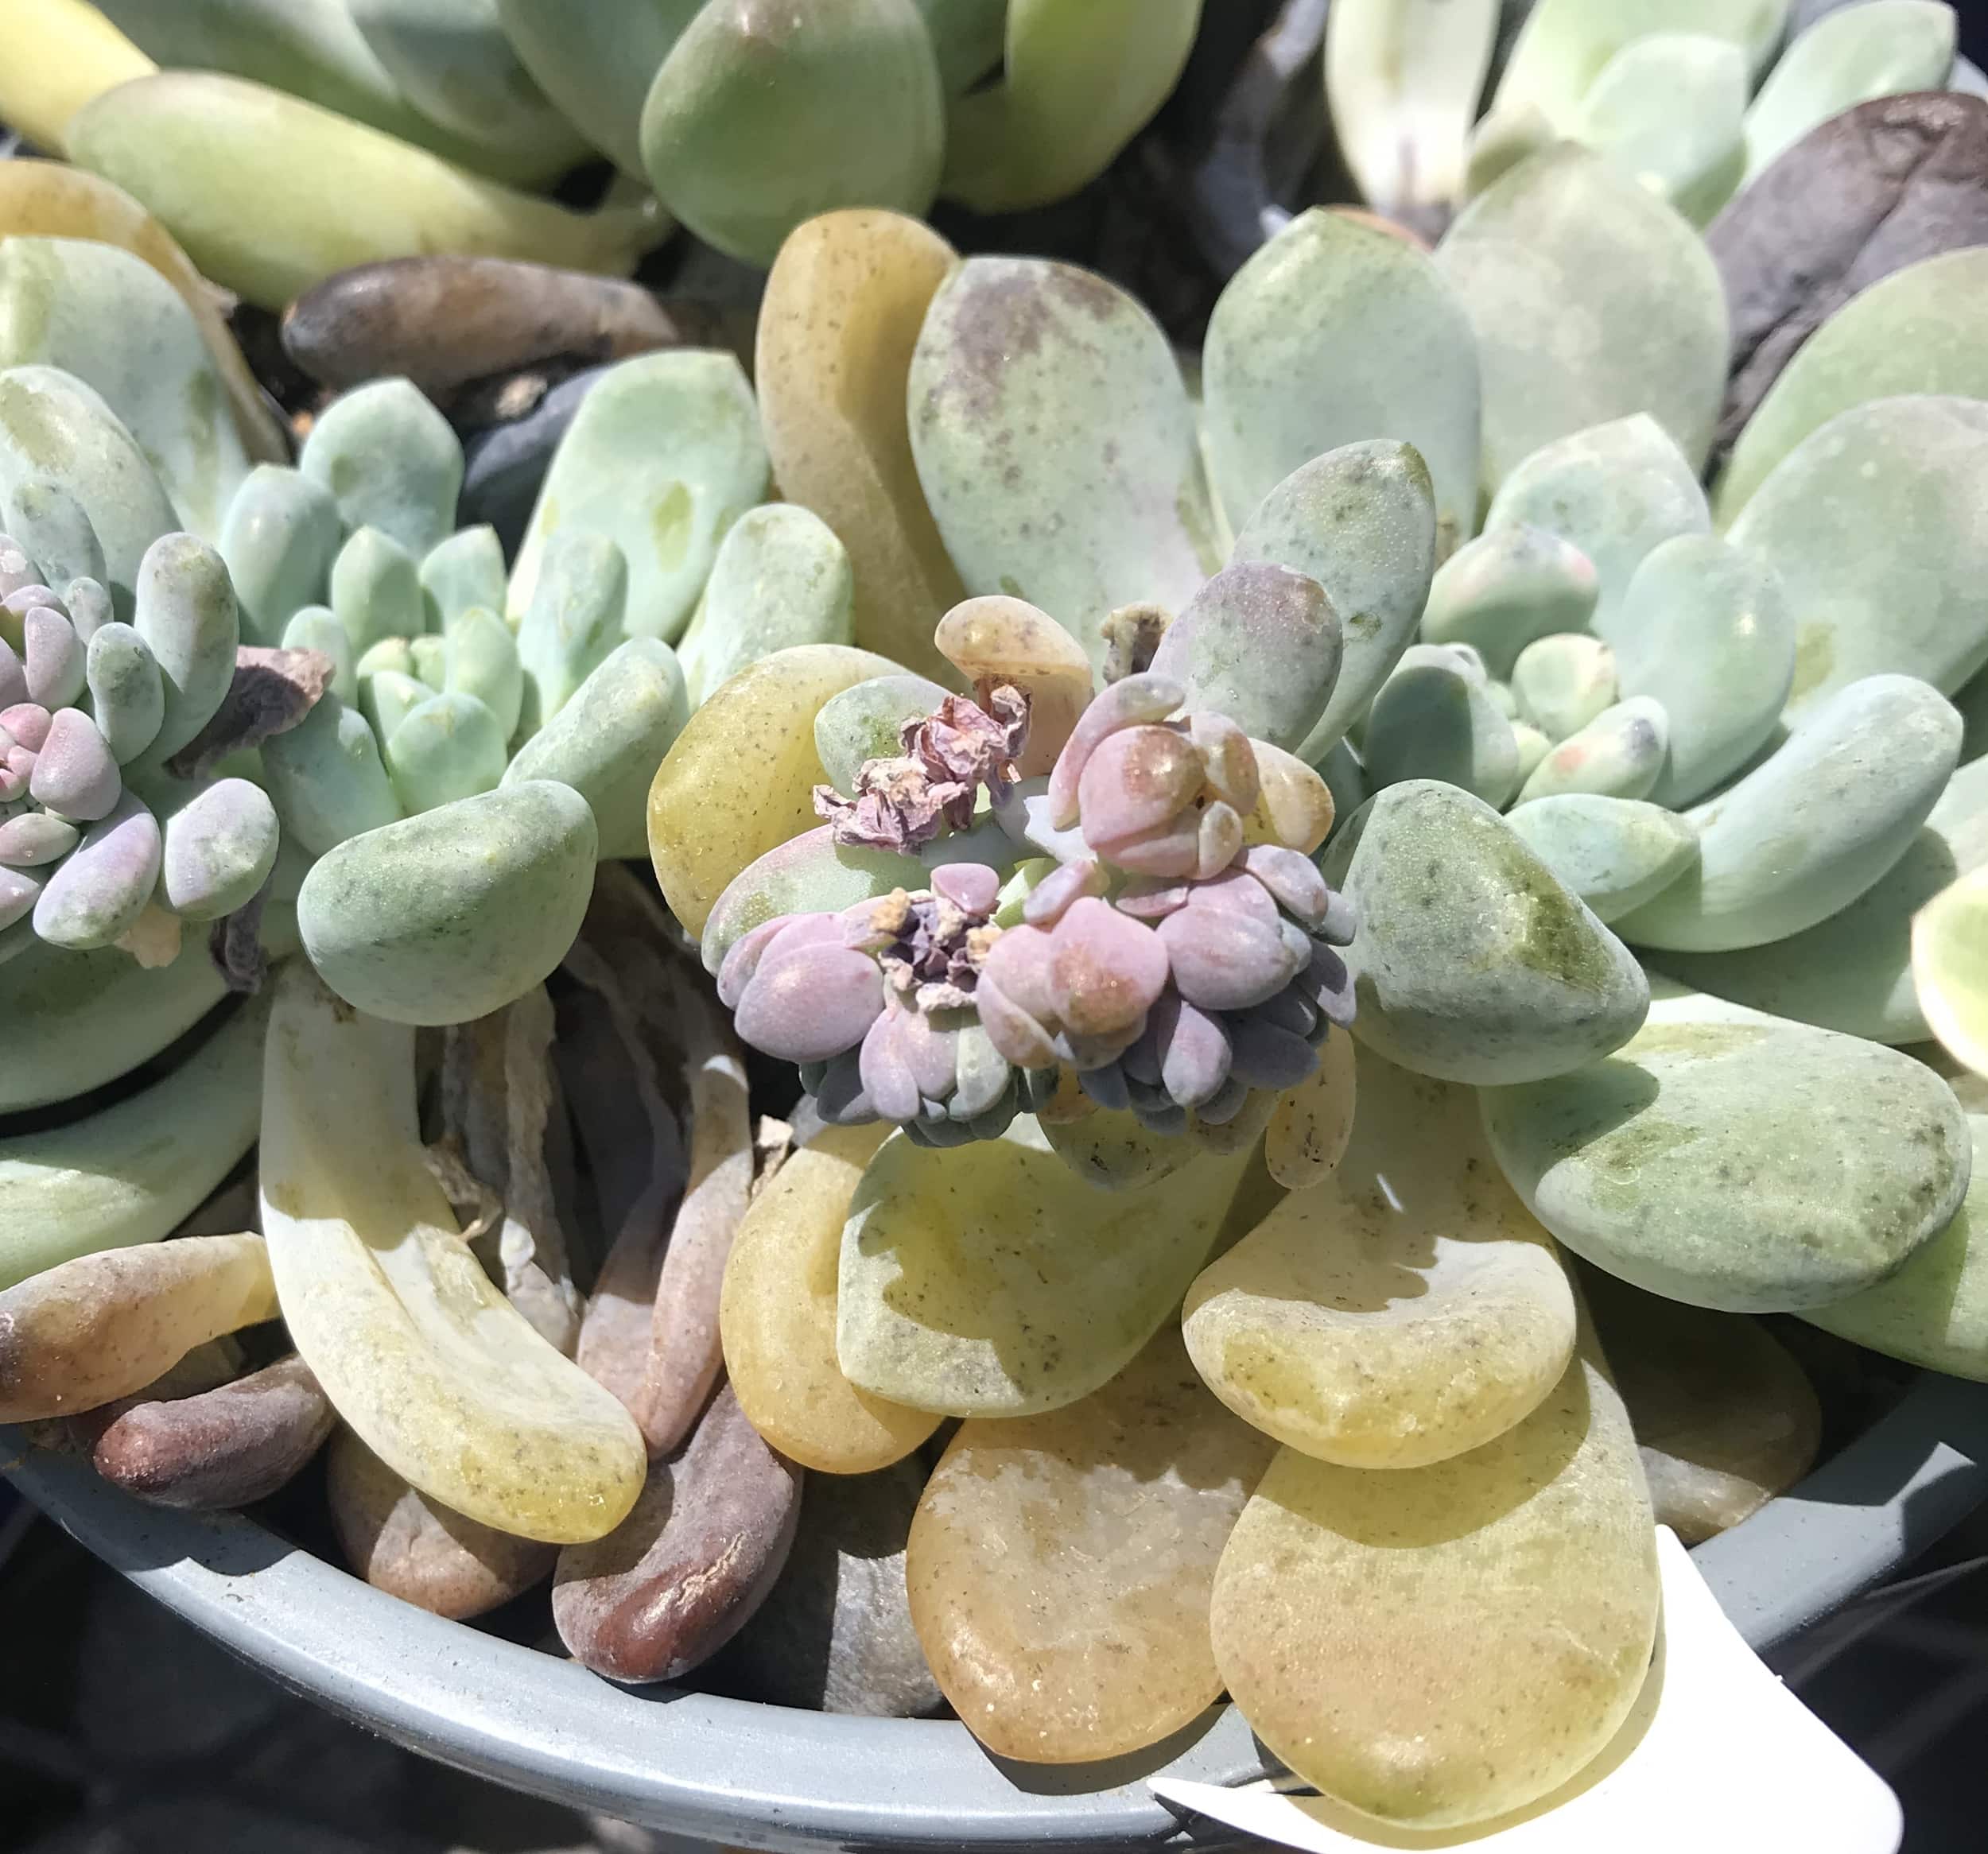 Overwatered succulents planted in plastic pot. Succulent is light teal but overwatered leaves appear soft and translucent yellow.